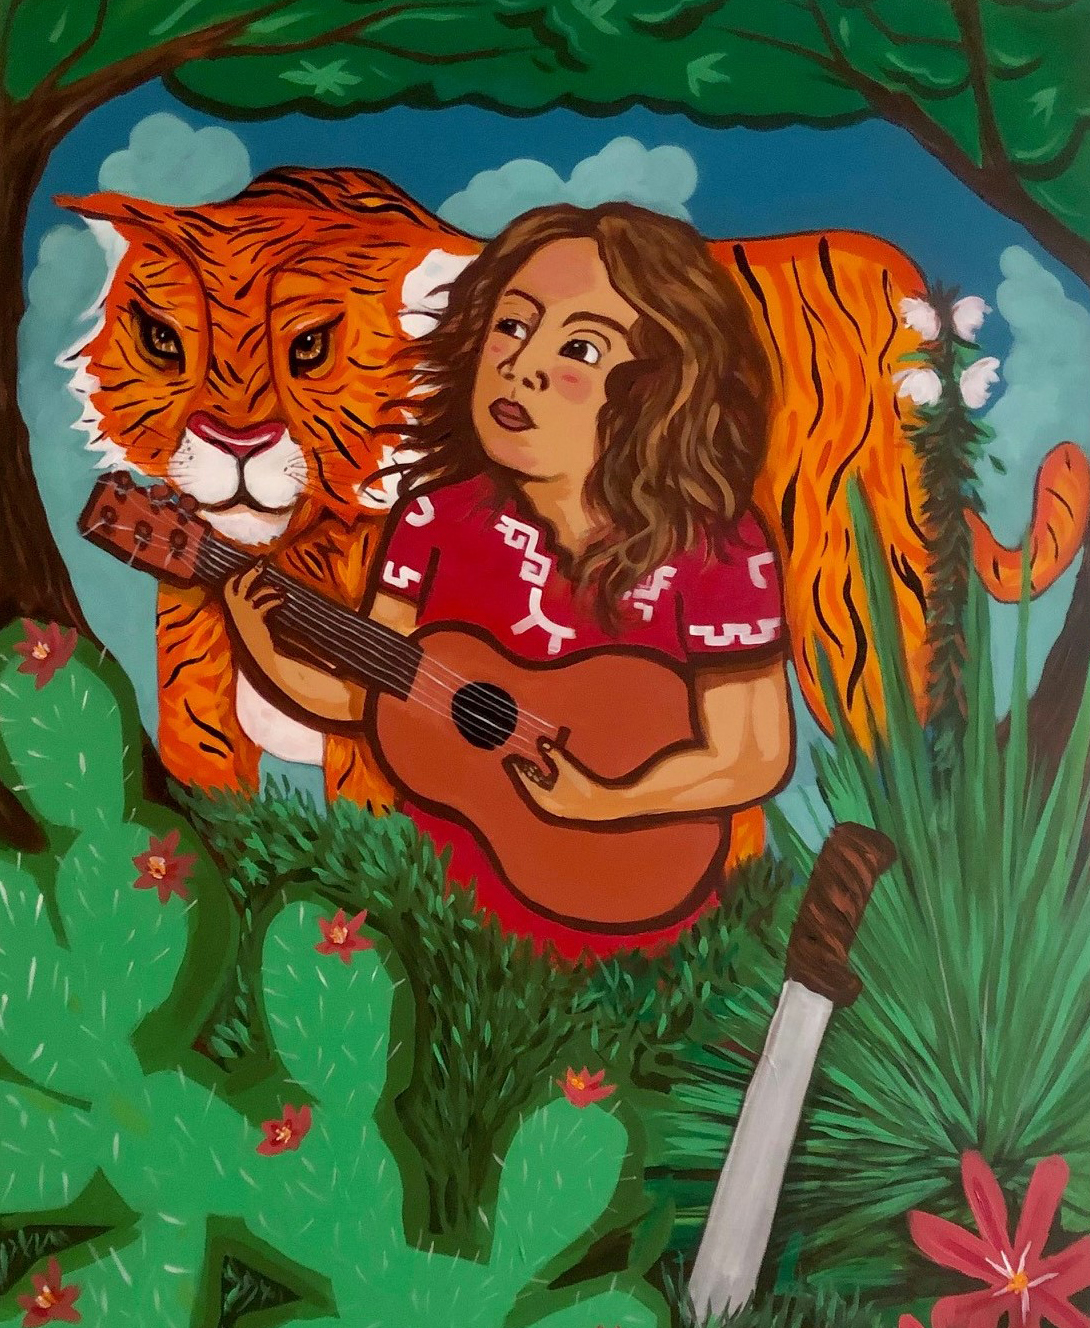 A guitarist with a tiger in the background; in the foreground, cacti and a machete